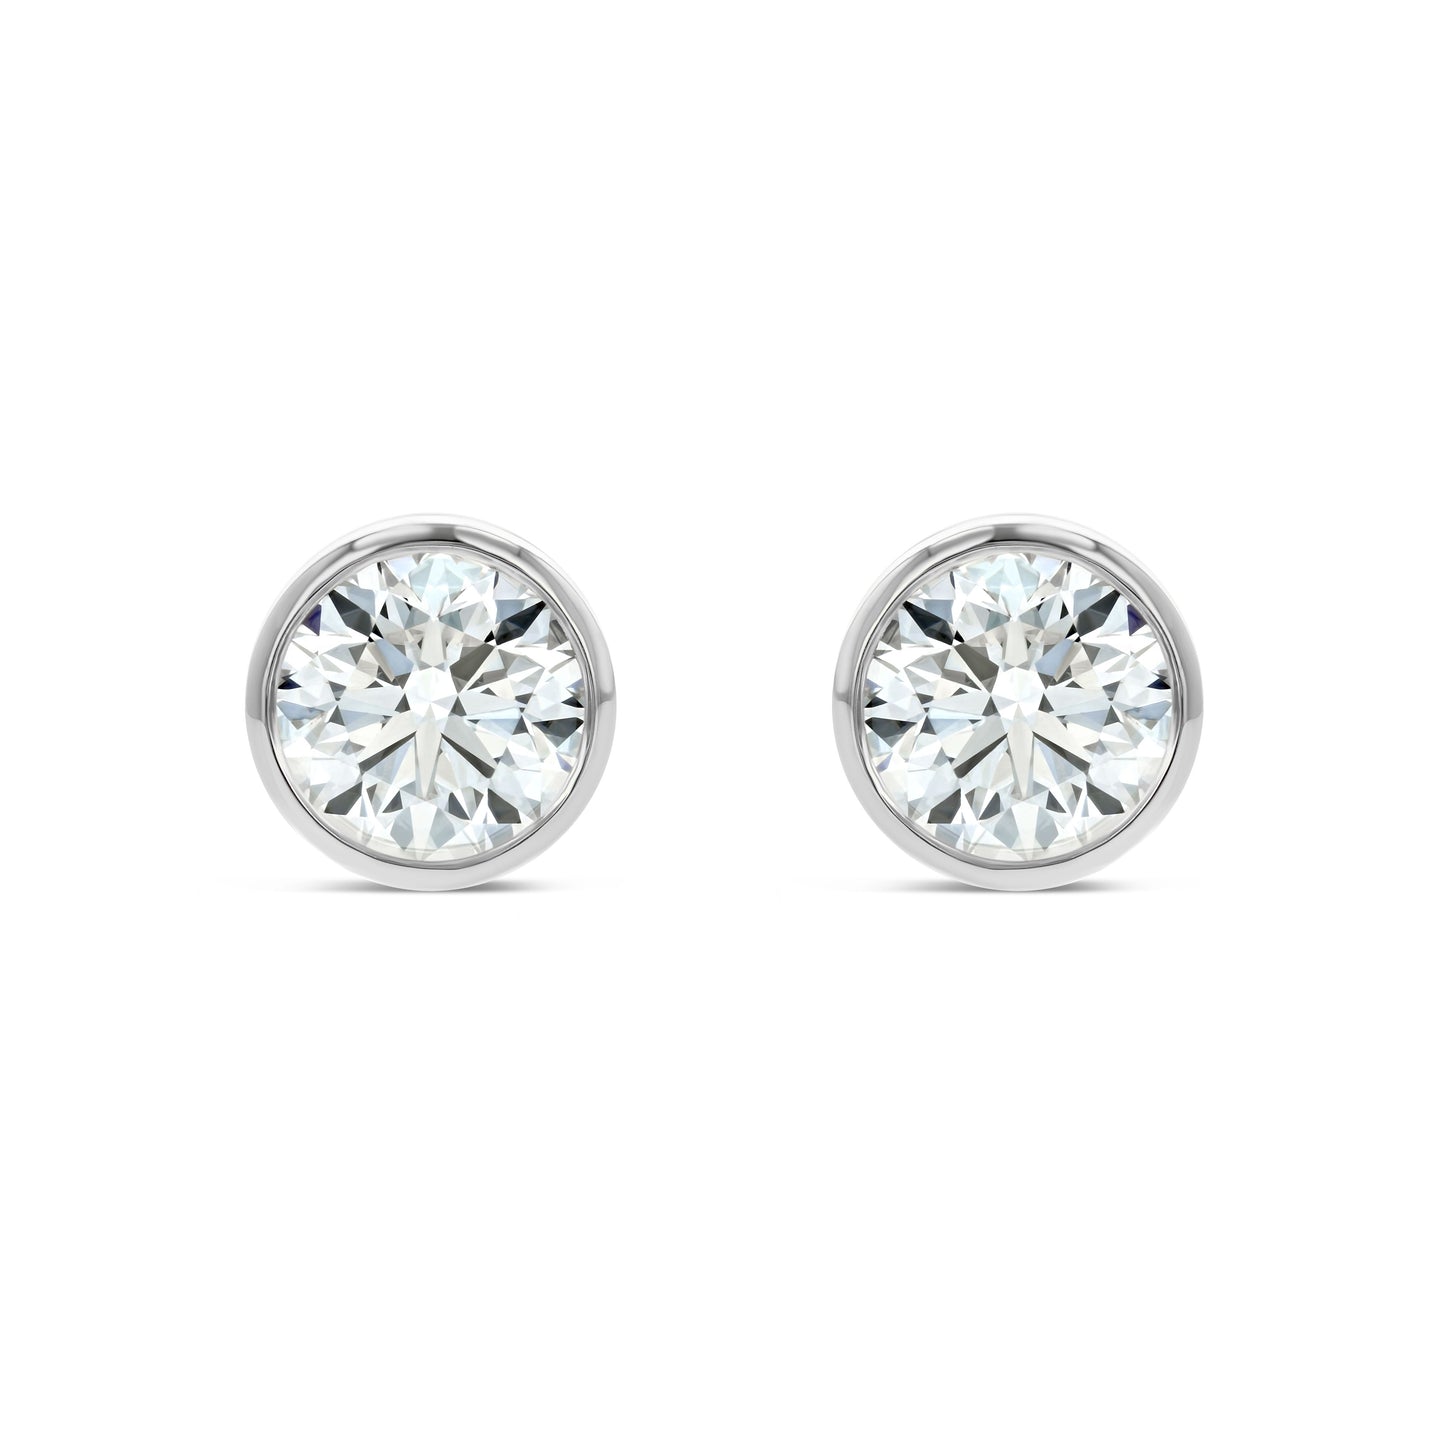 18k White Gold Bezel Set Round Brilliant Diamond Stud Earrings (0.75 Ct. T.w., Si1-si2 Clarity, H-i Color)